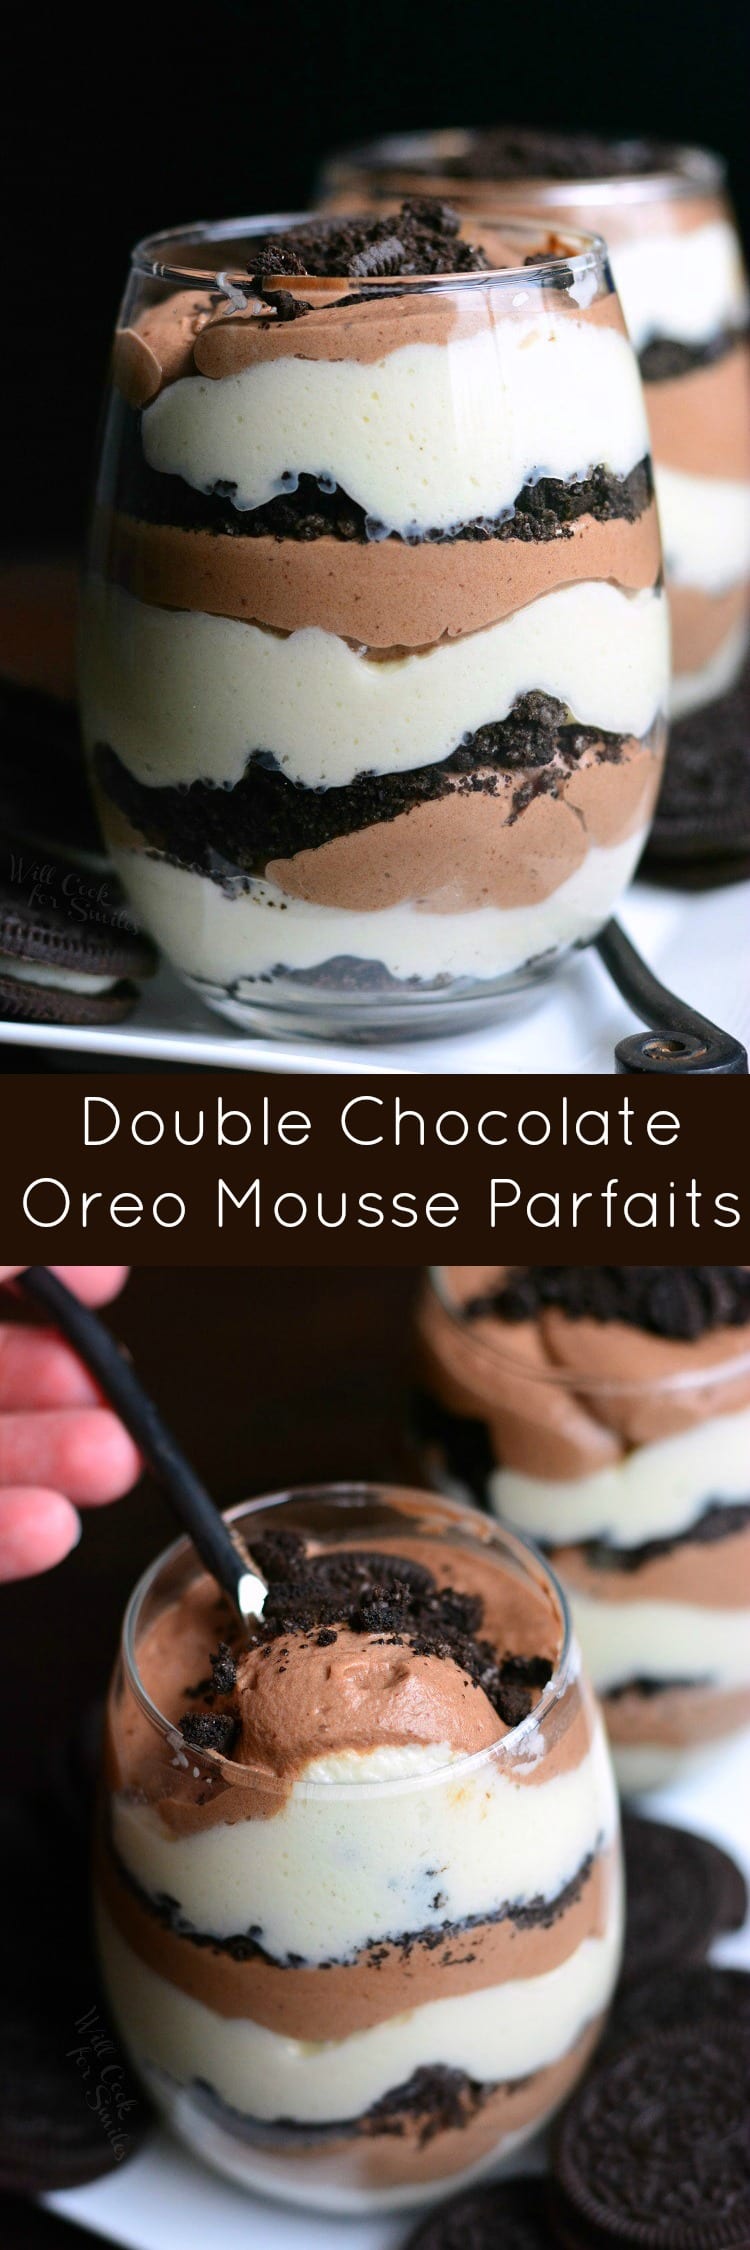 Oreo Double Chocolate Mousse Parfaits in a glass collage 